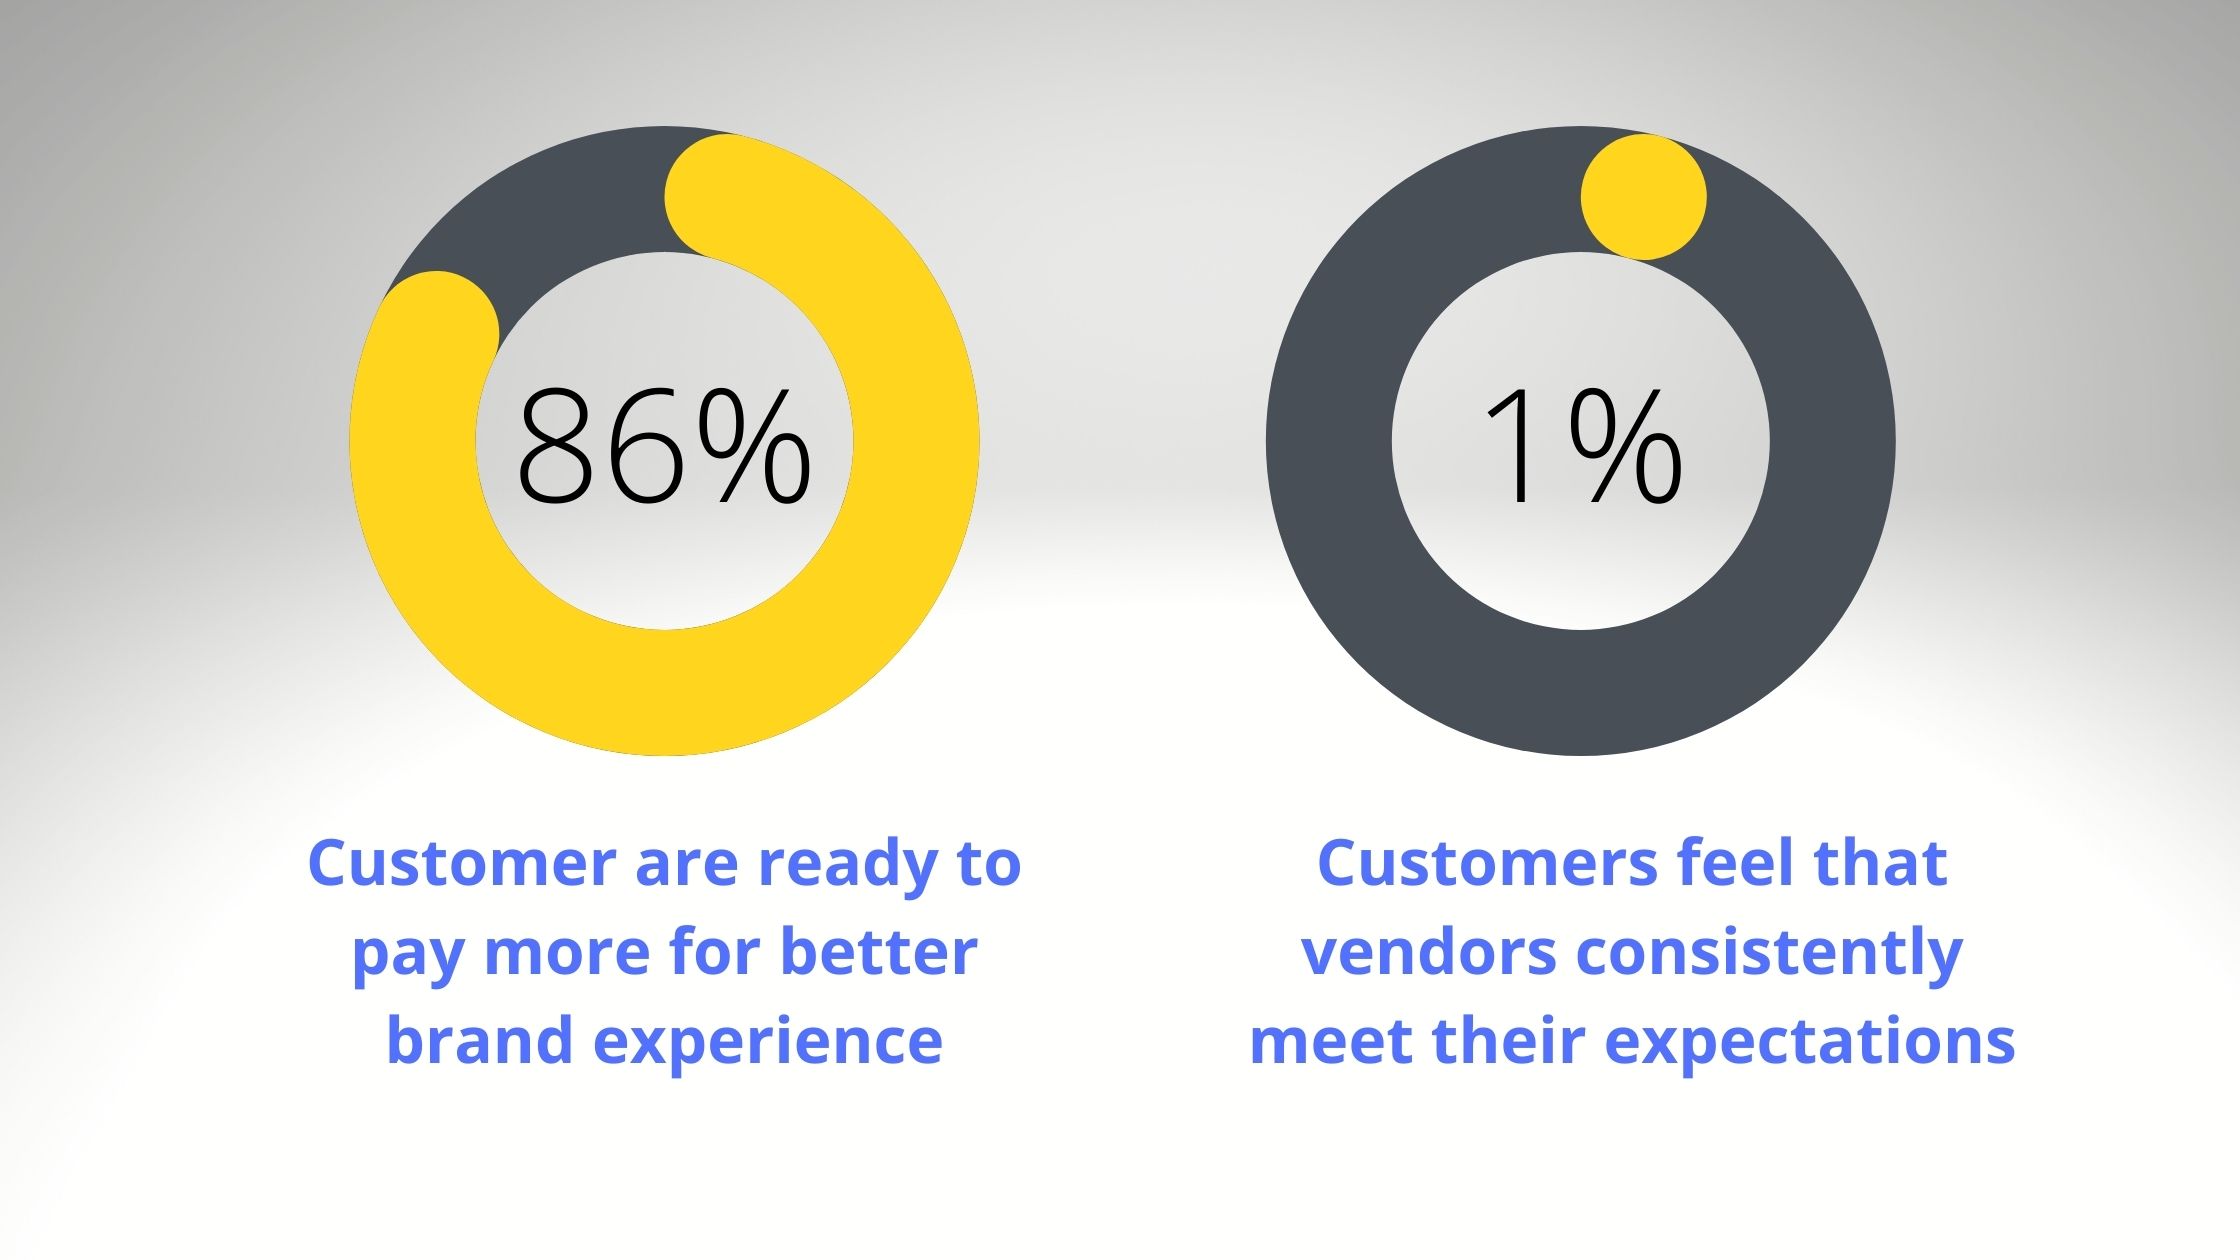 Customers who are ready to pay more for better brand experience